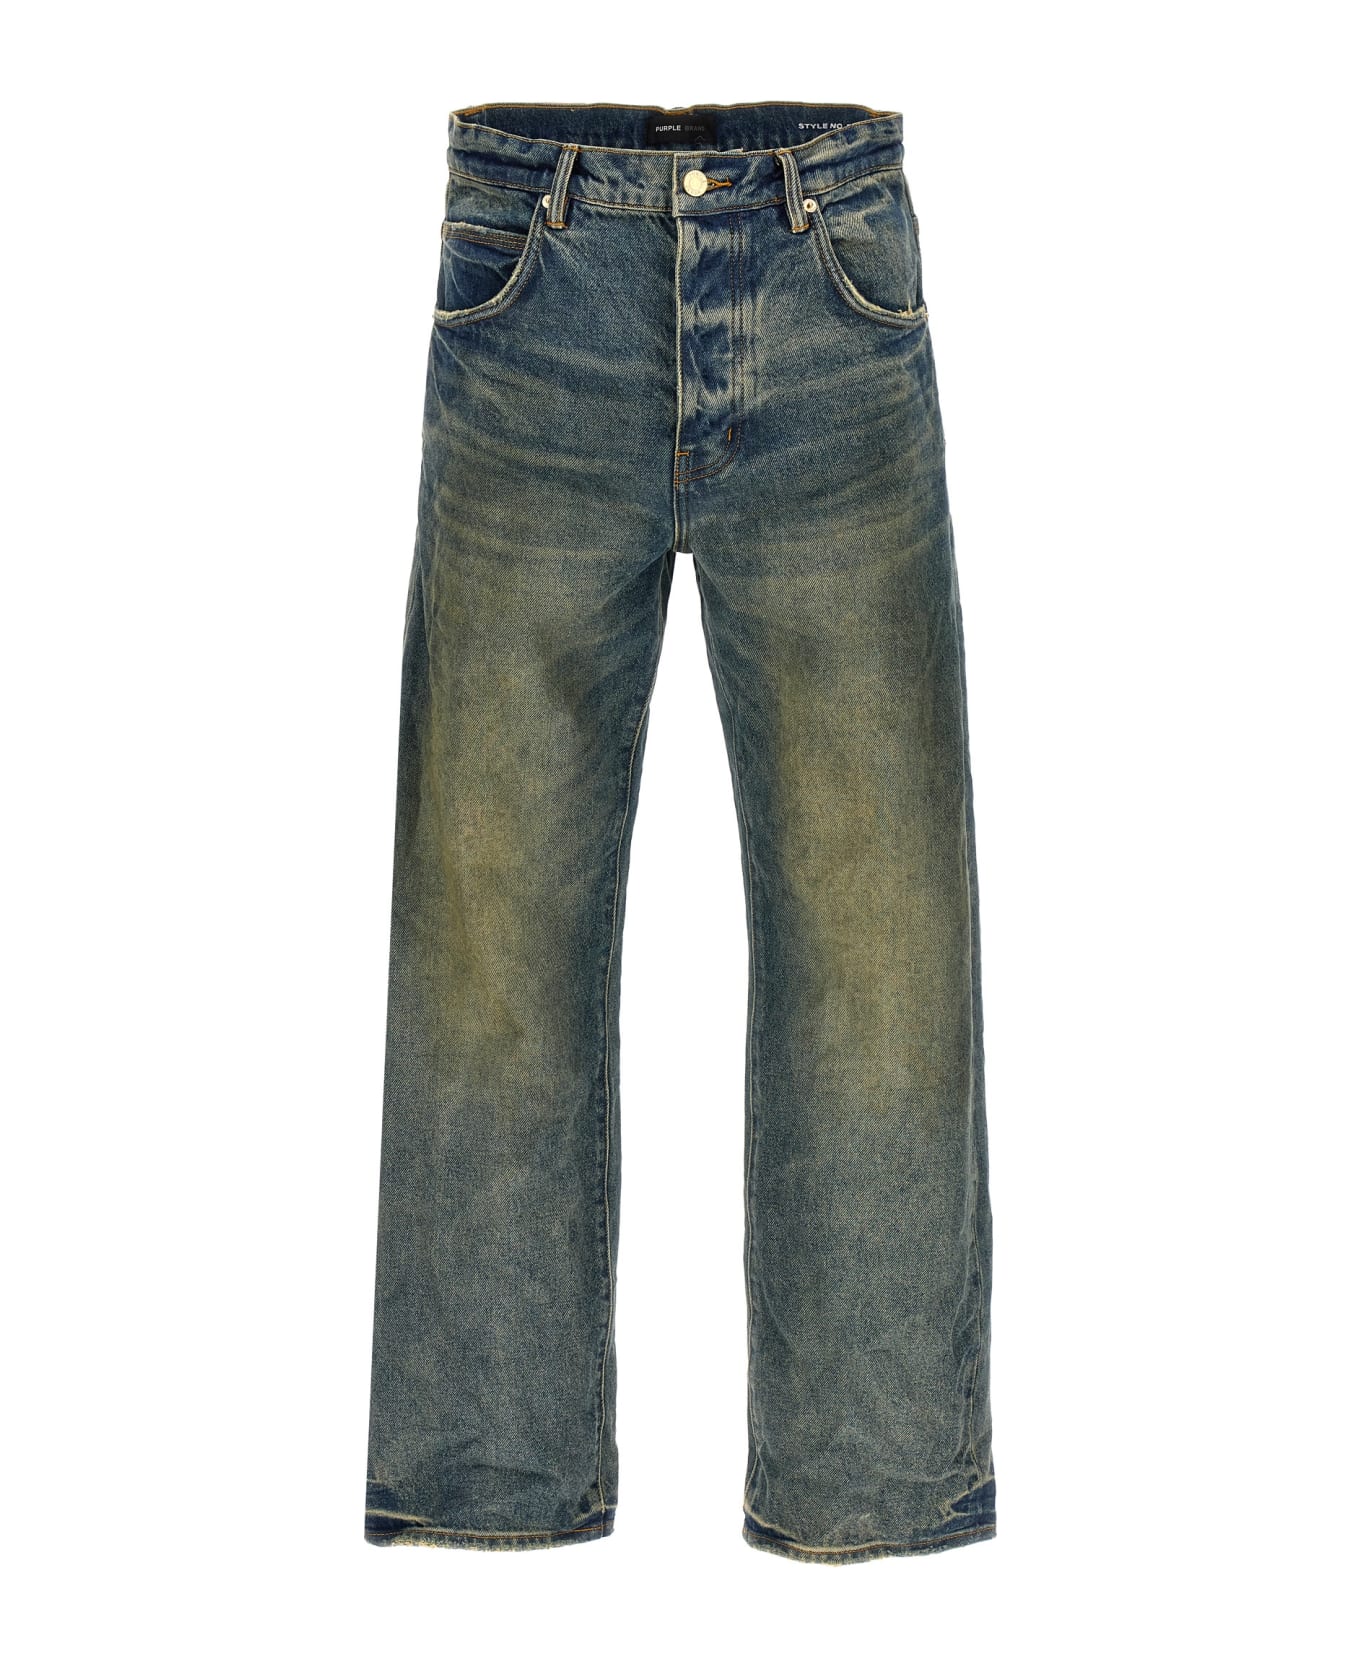 Purple Brand 'relaxed Vintage Dirty' Jeans - Blue